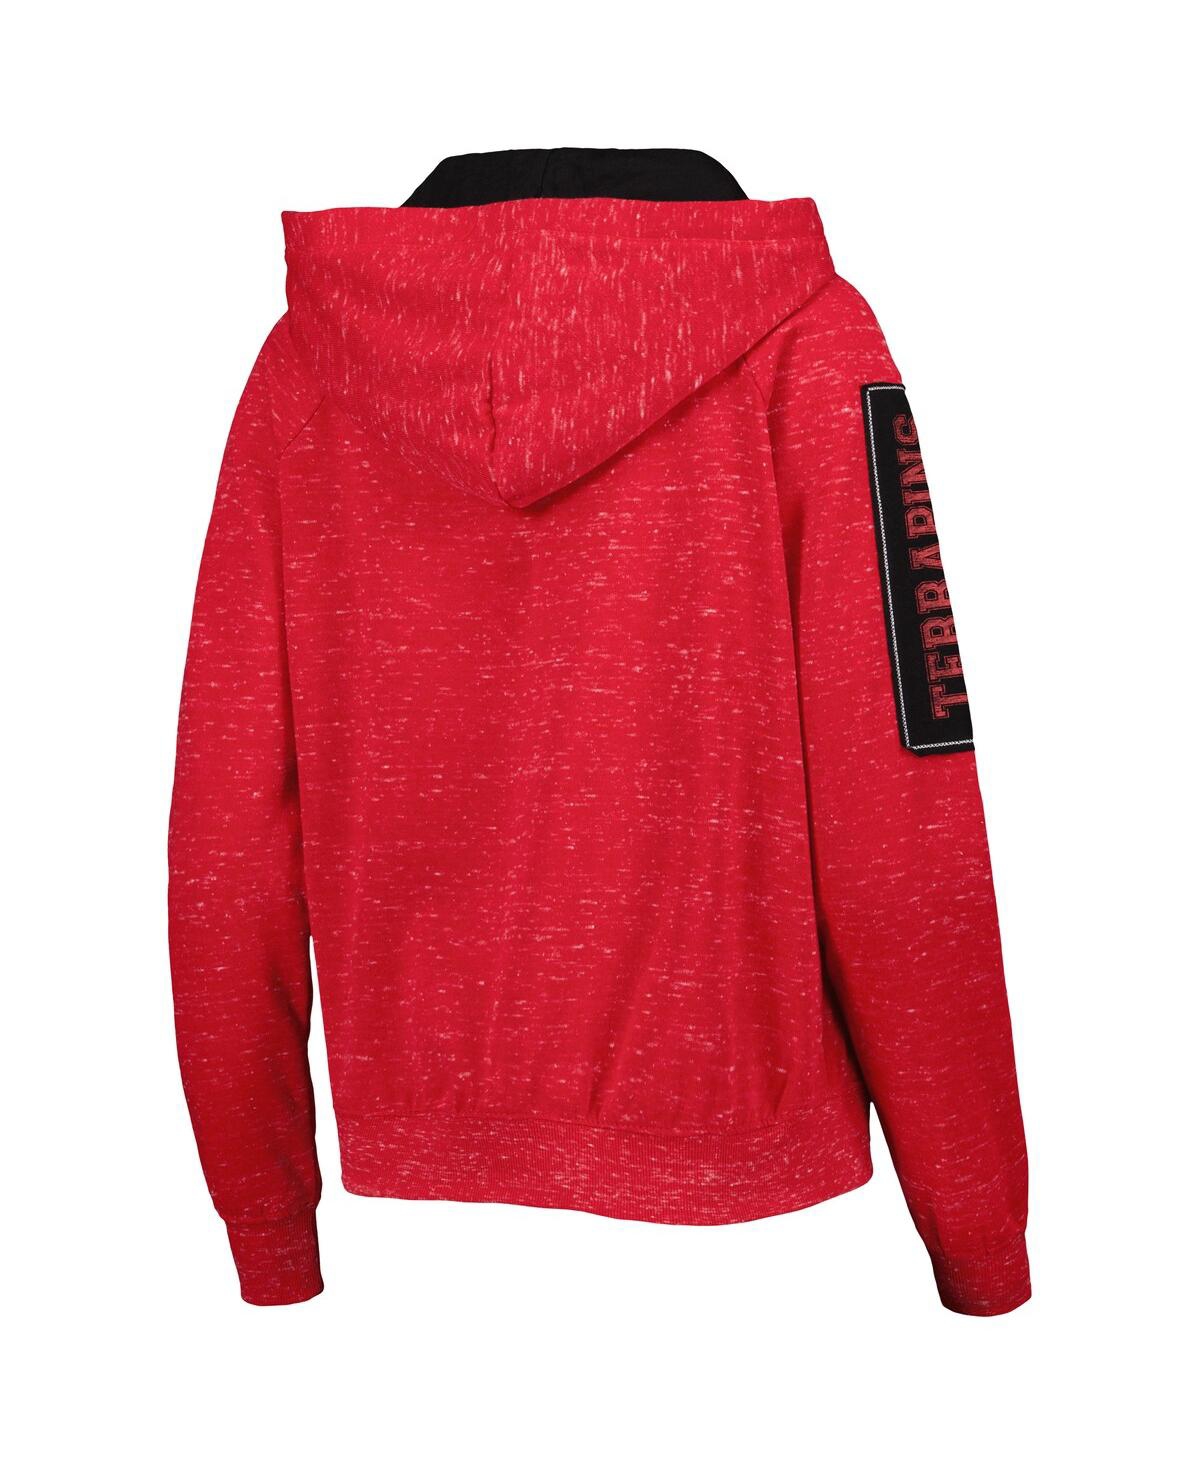 Shop Colosseum Women's  Red Maryland Terrapins The Devil Speckle Lace-placket Raglan Pullover Hoodie